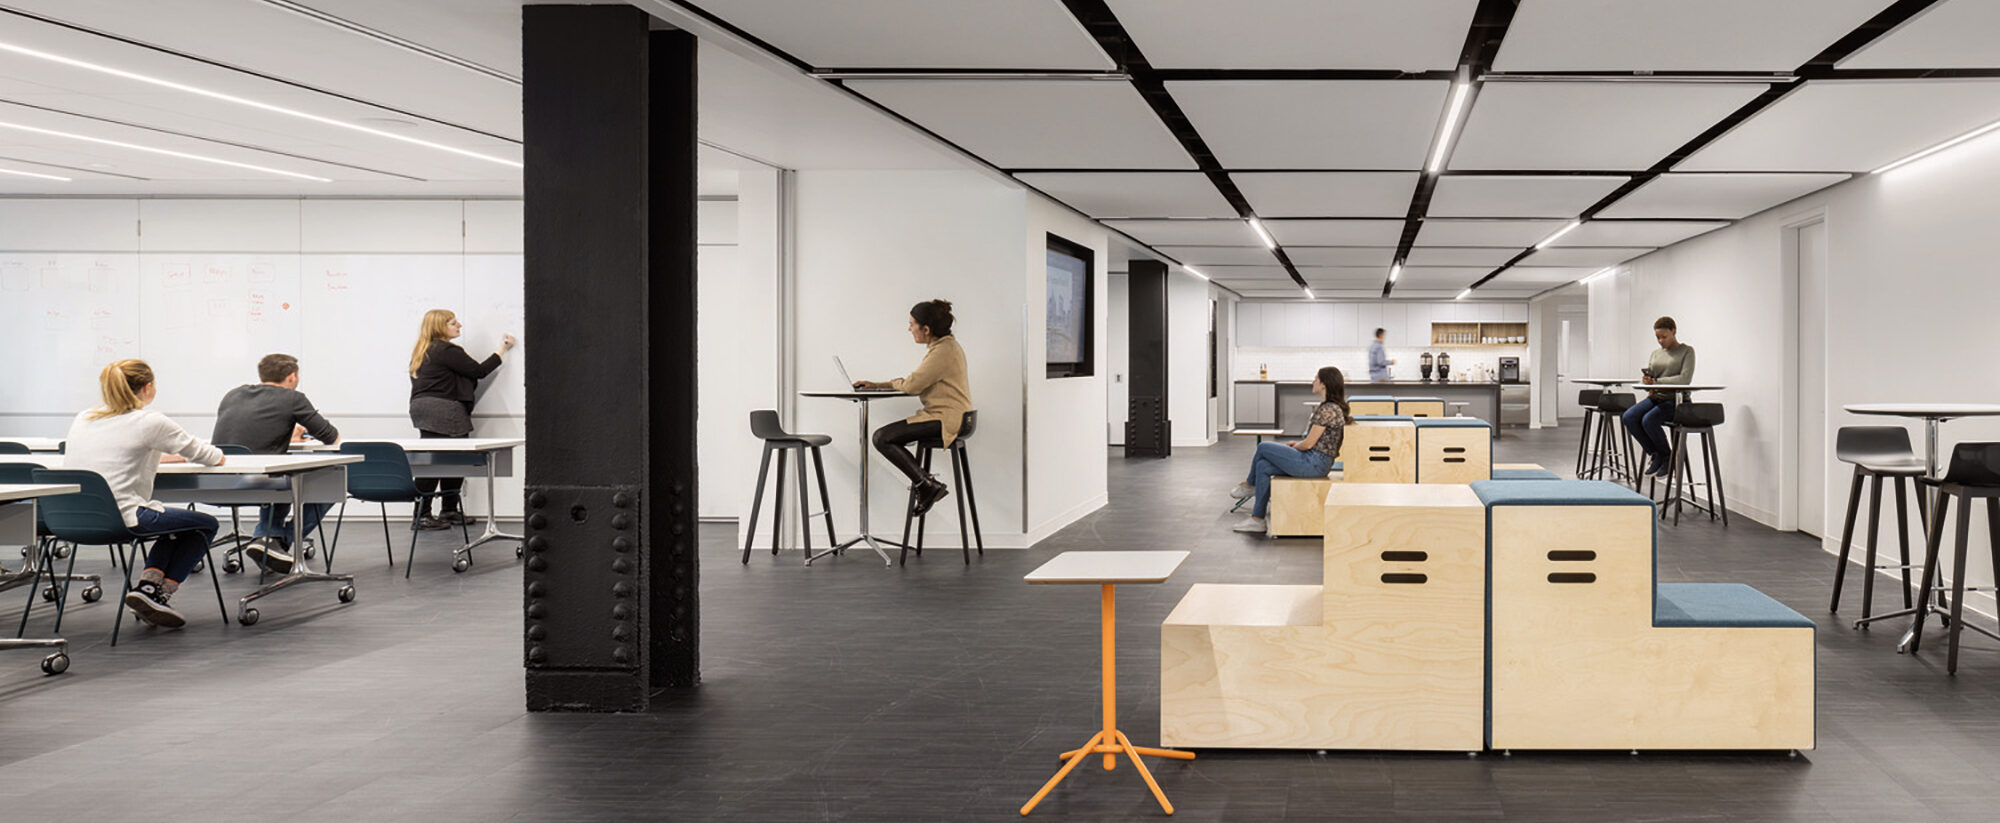 Modern office space with an open floor plan featuring a central plywood staircase, minimalist furniture, and uniform lighting. Strategic seating areas encourage collaboration, while the color contrast adds vibrancy to the monochrome palette.